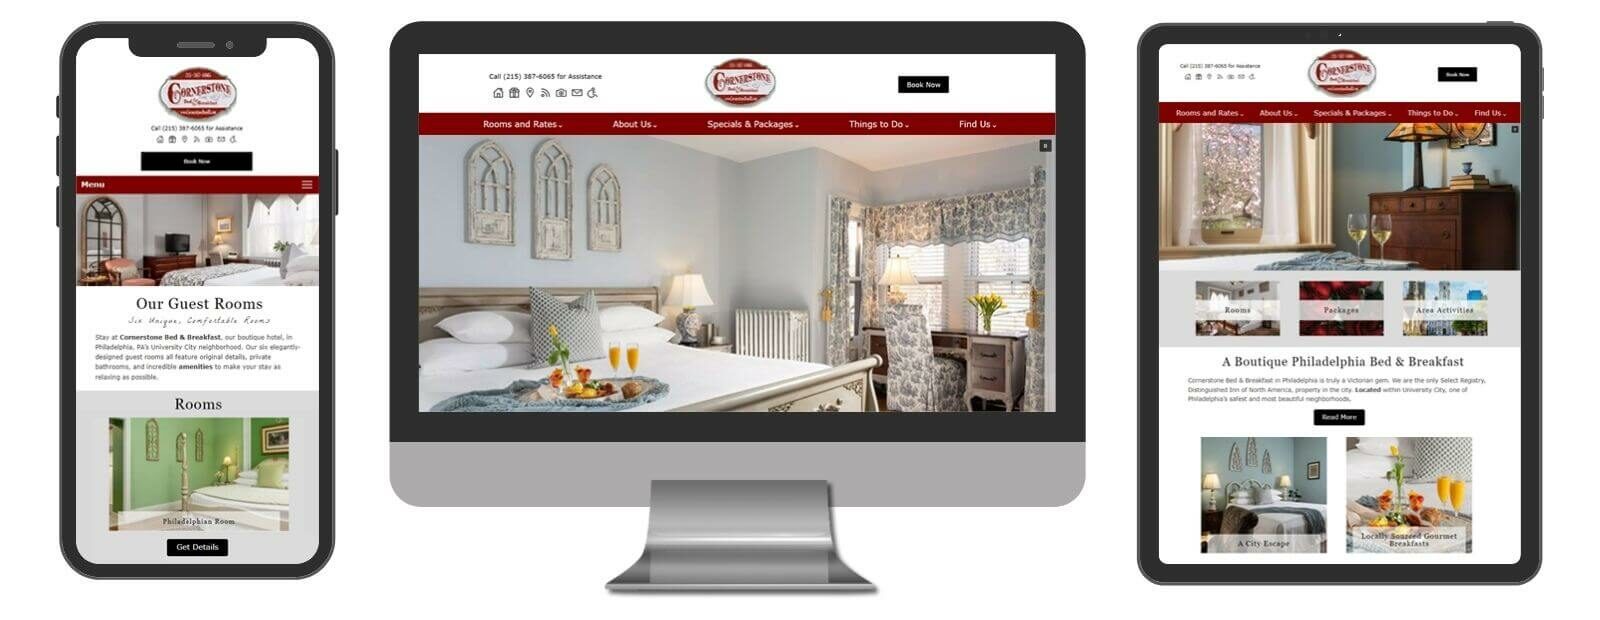 Cornerstone Bed & Breakfast displayed in 3 sizes - mobile, template and desktop